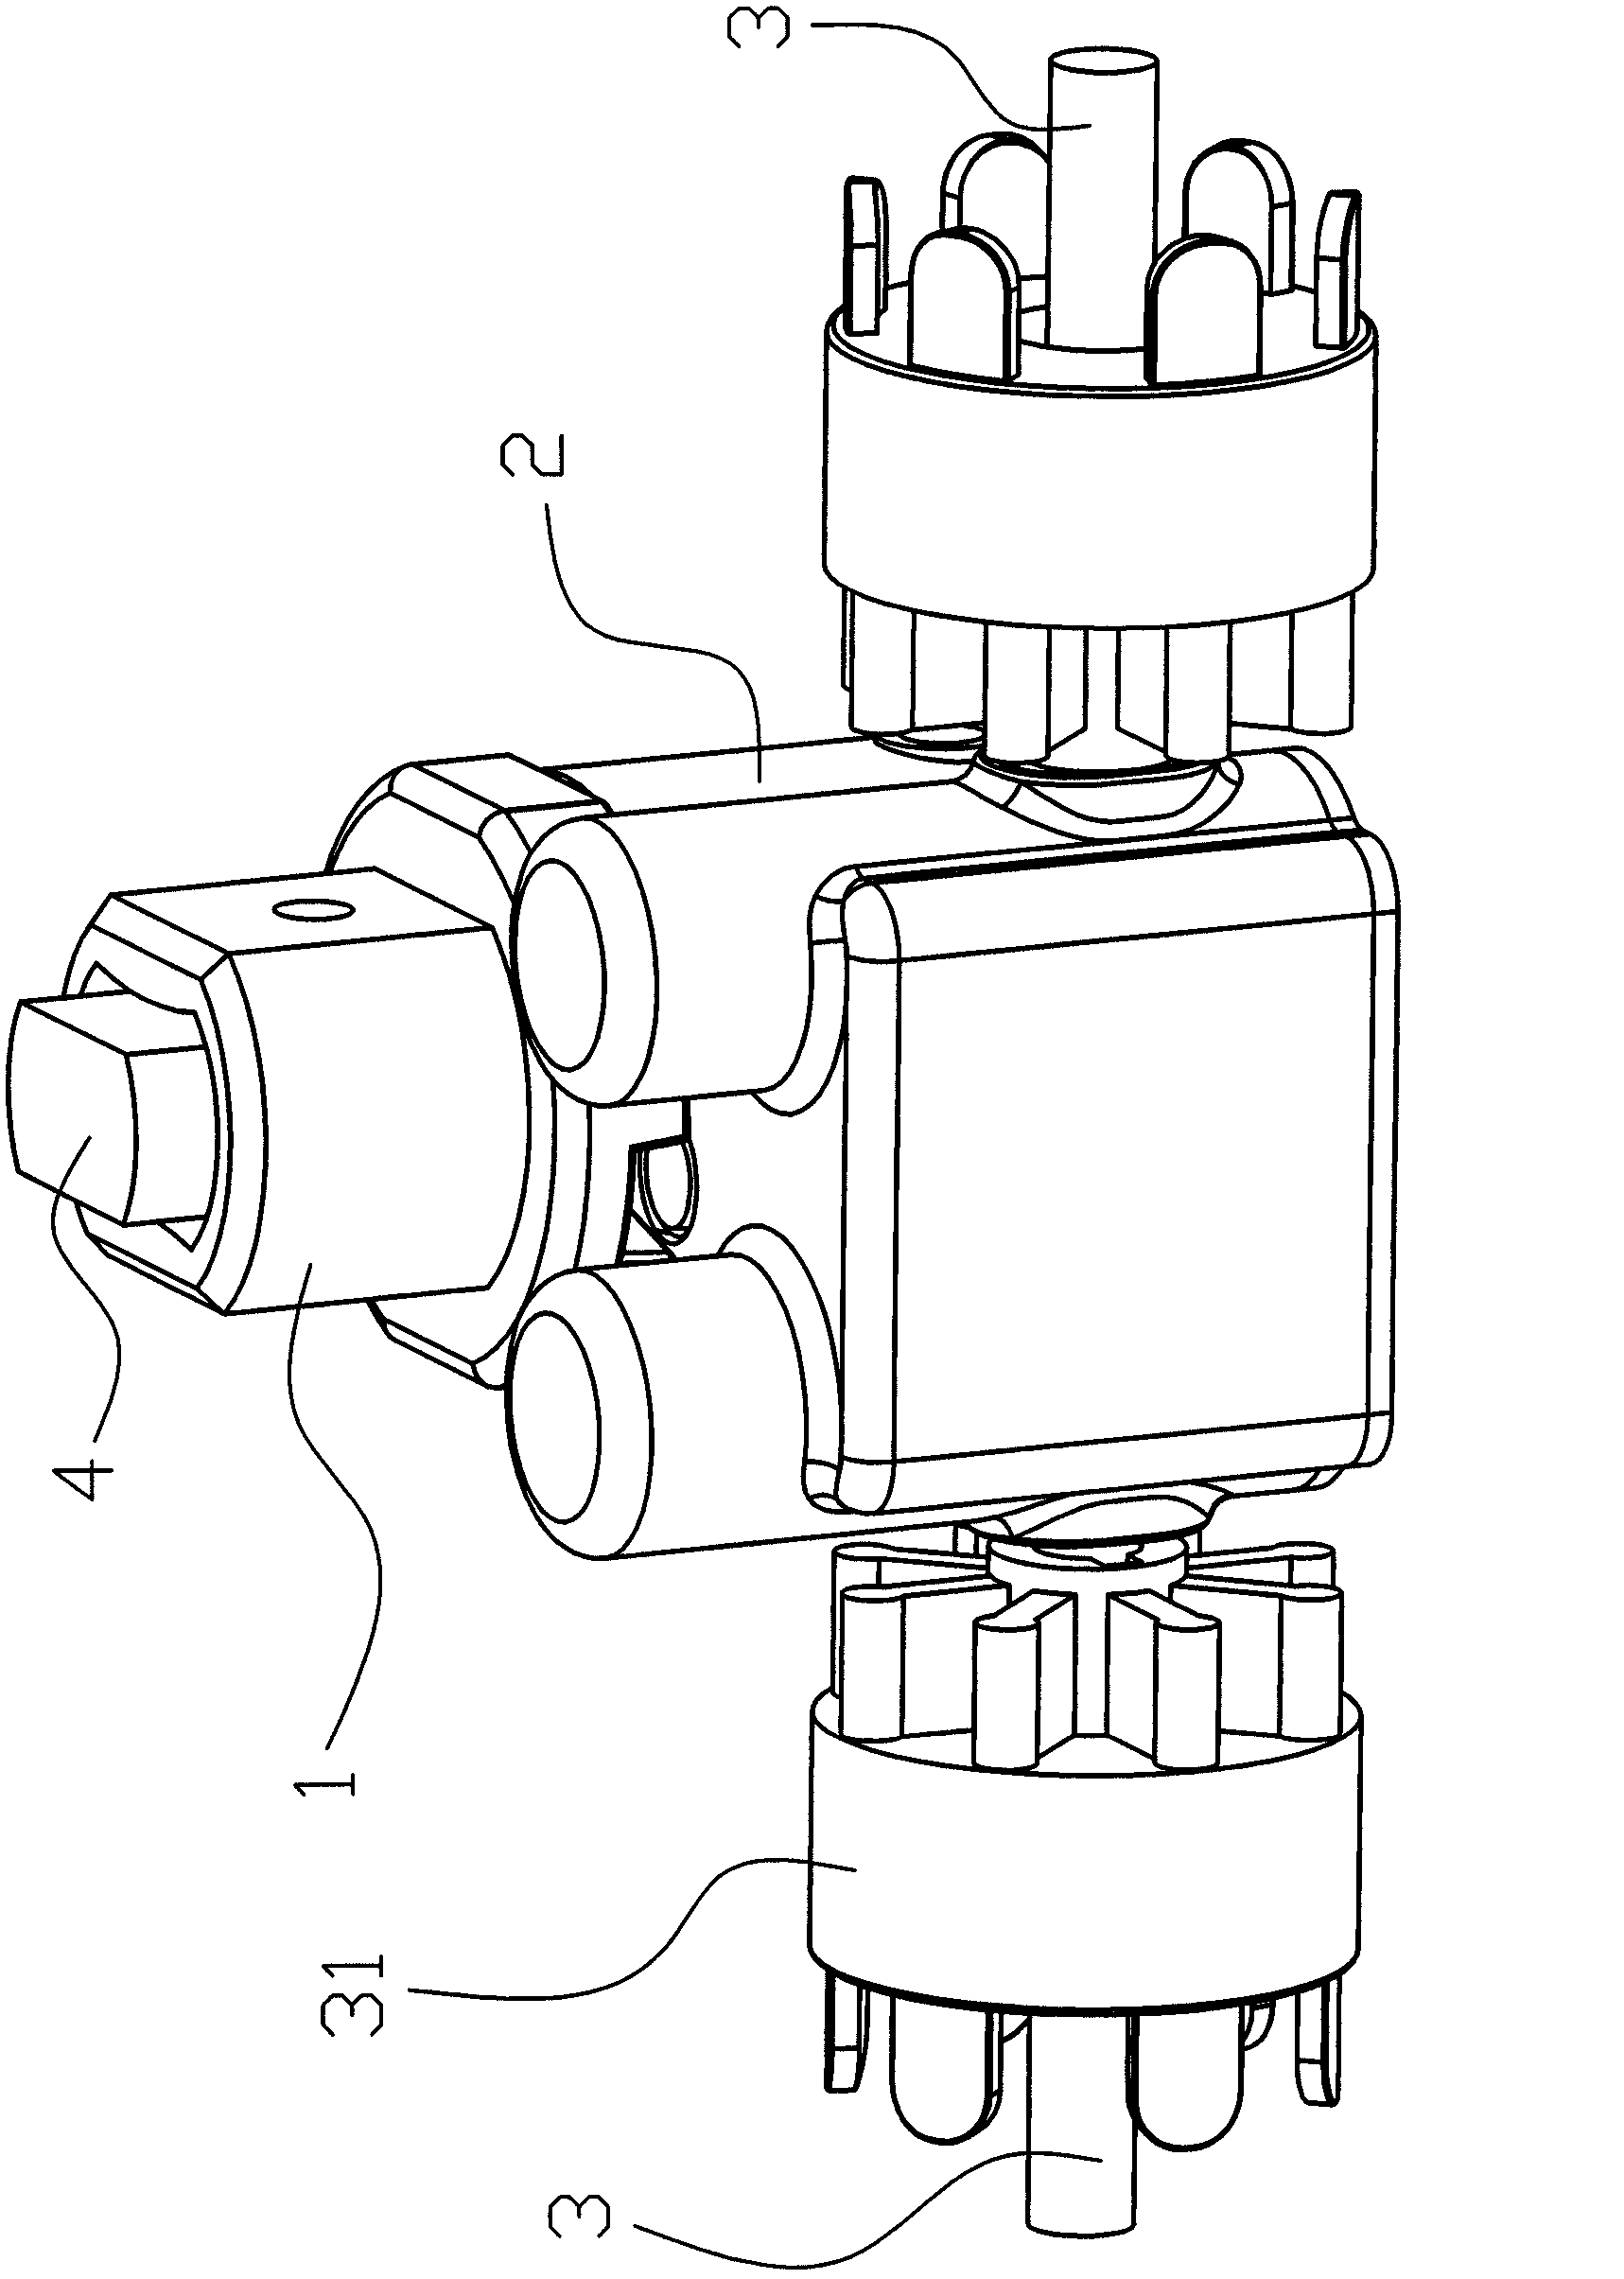 Automatic switching mechanism for universal movement and directional movement of cart wheels